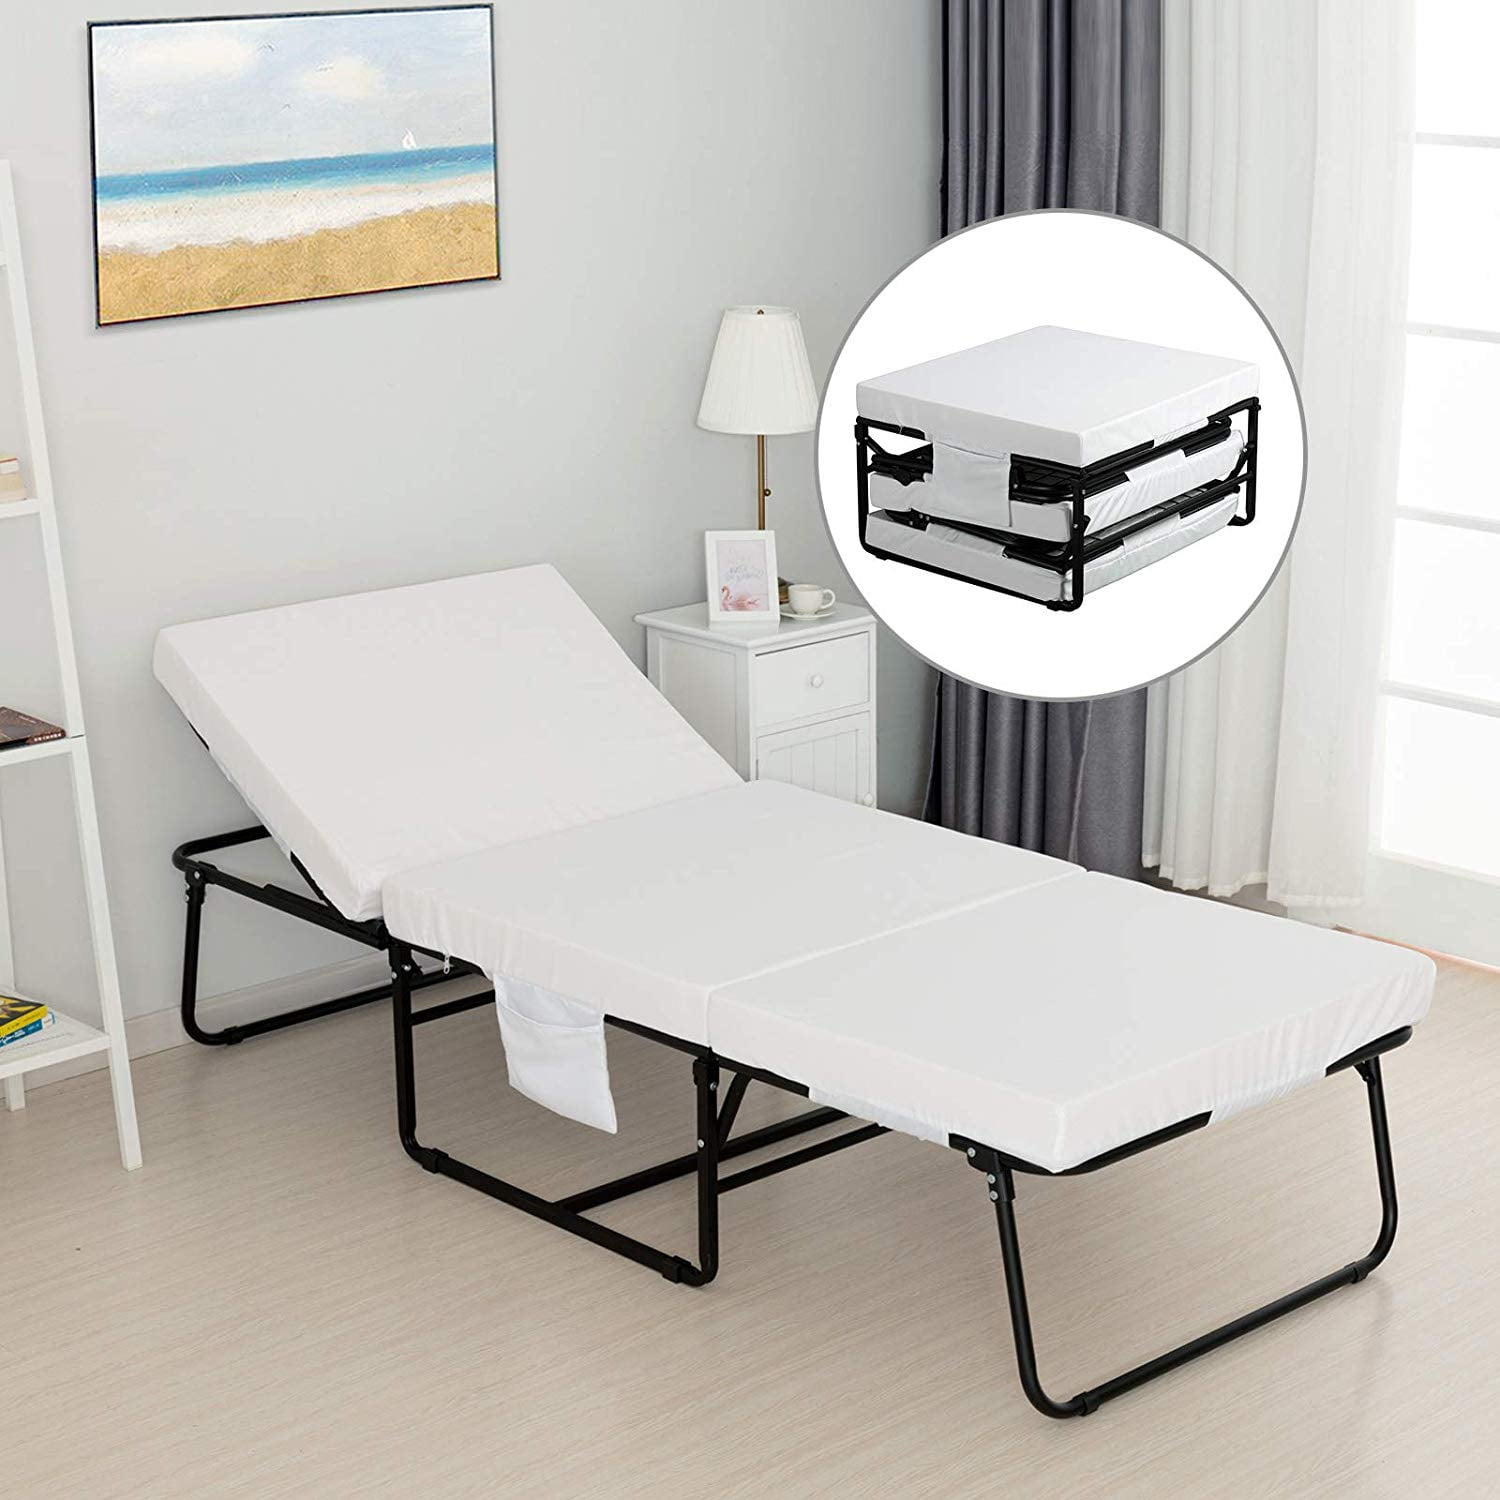 Mecor Modern Metal Adjustable Folding, Twin Xl Guest Bed